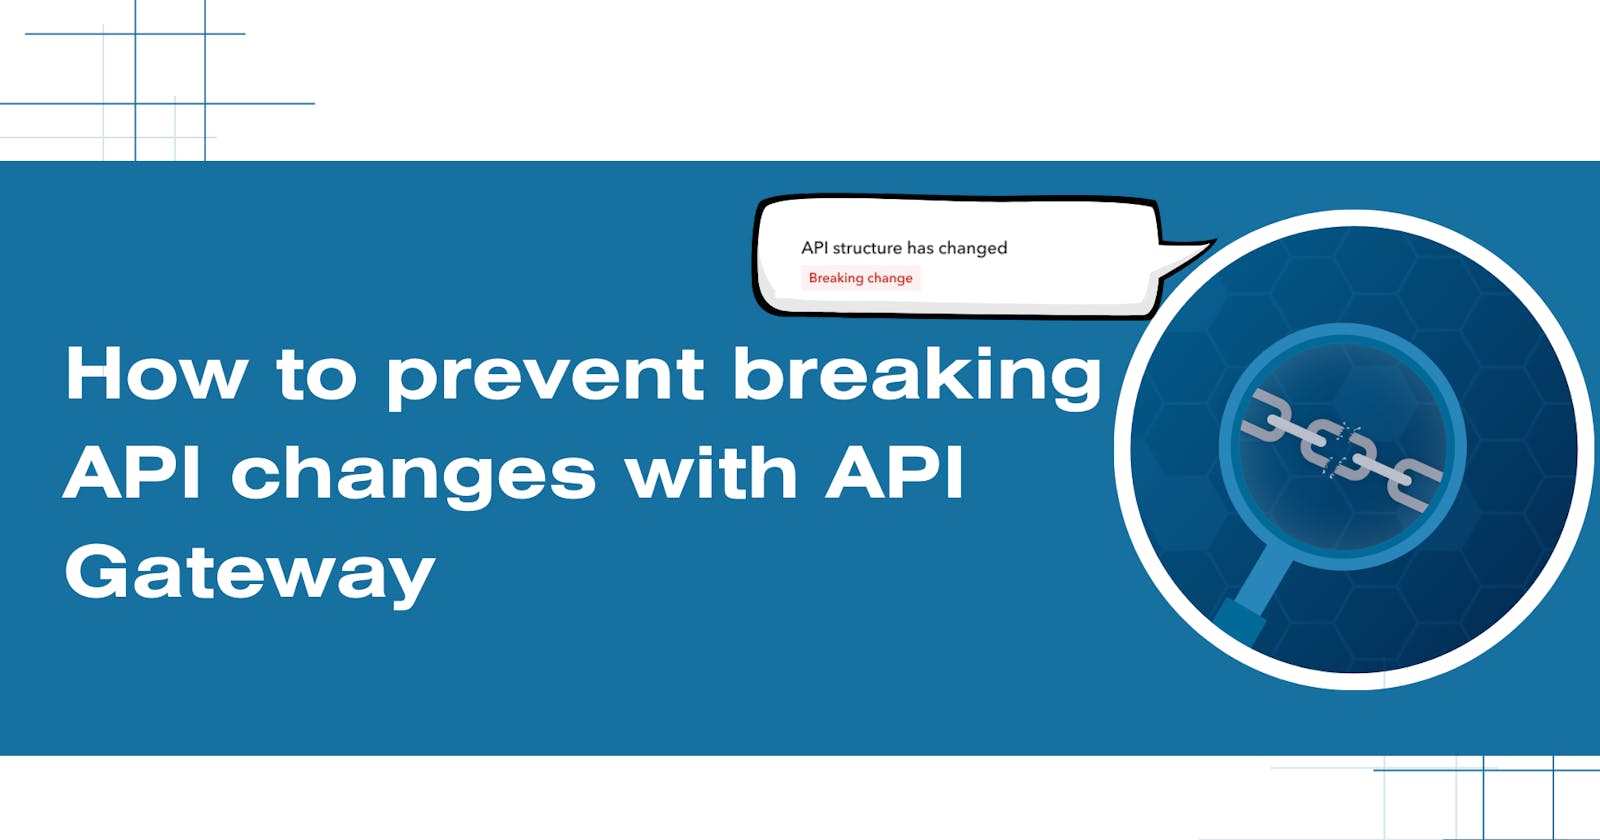 How to prevent breaking API changes with API Gateway